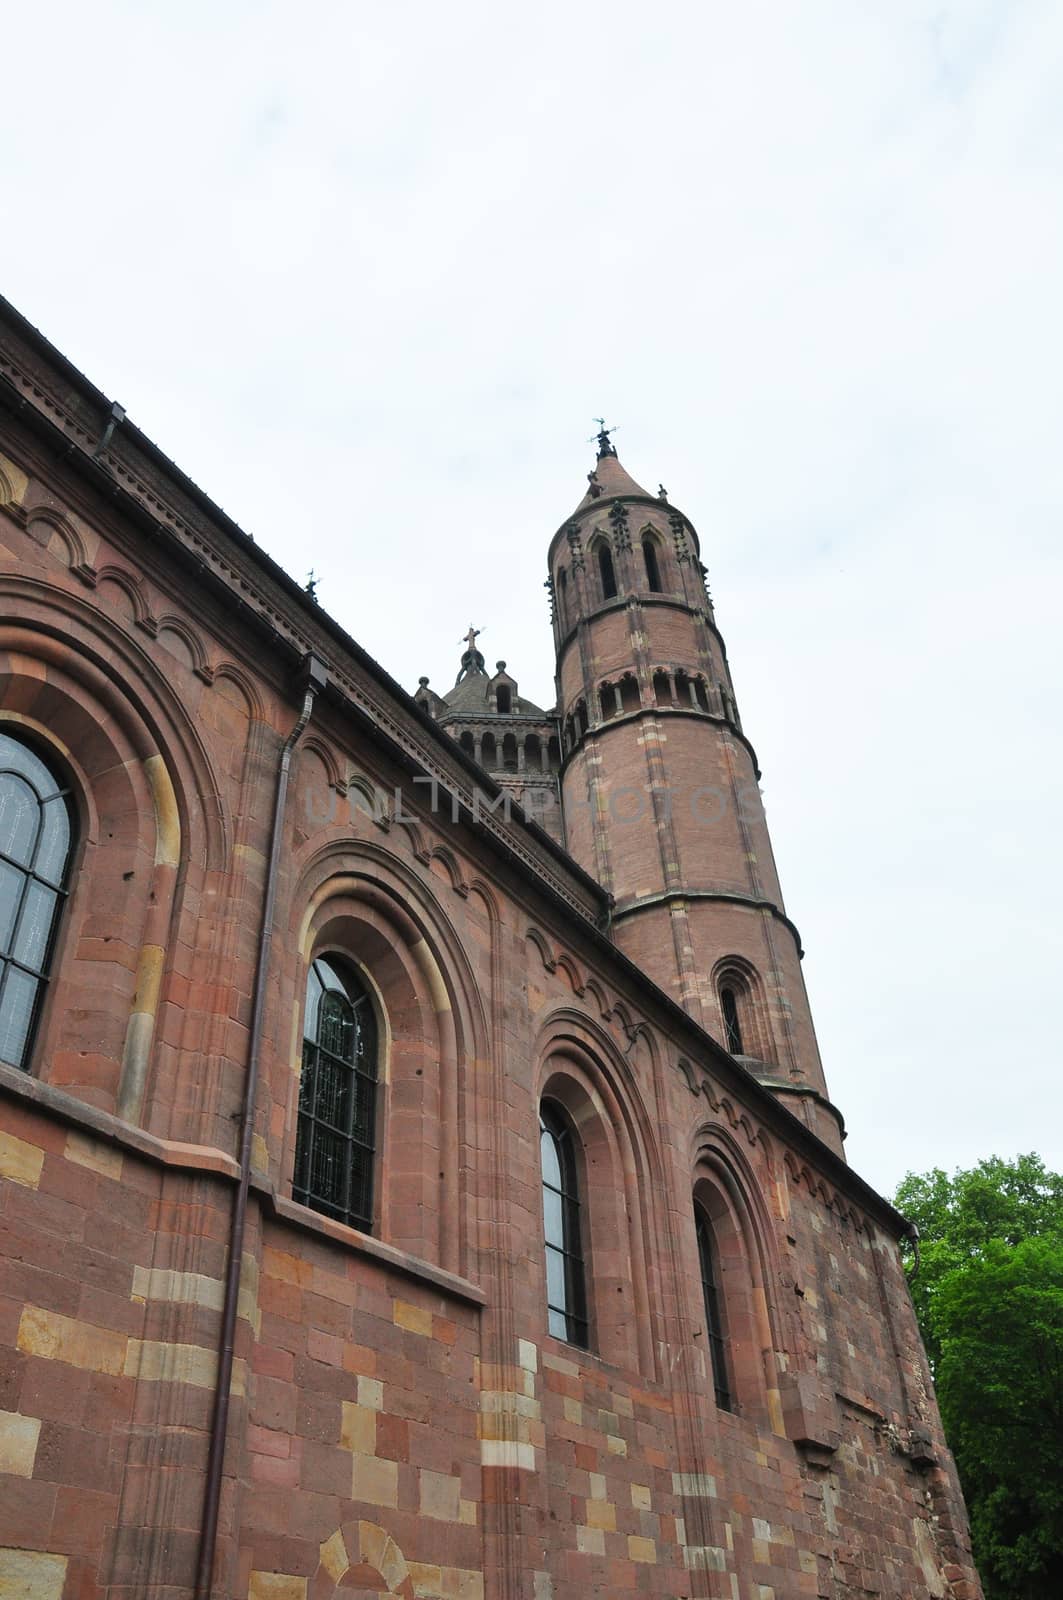 Cathedral Saint Peter in Worms, Germany by rbiedermann